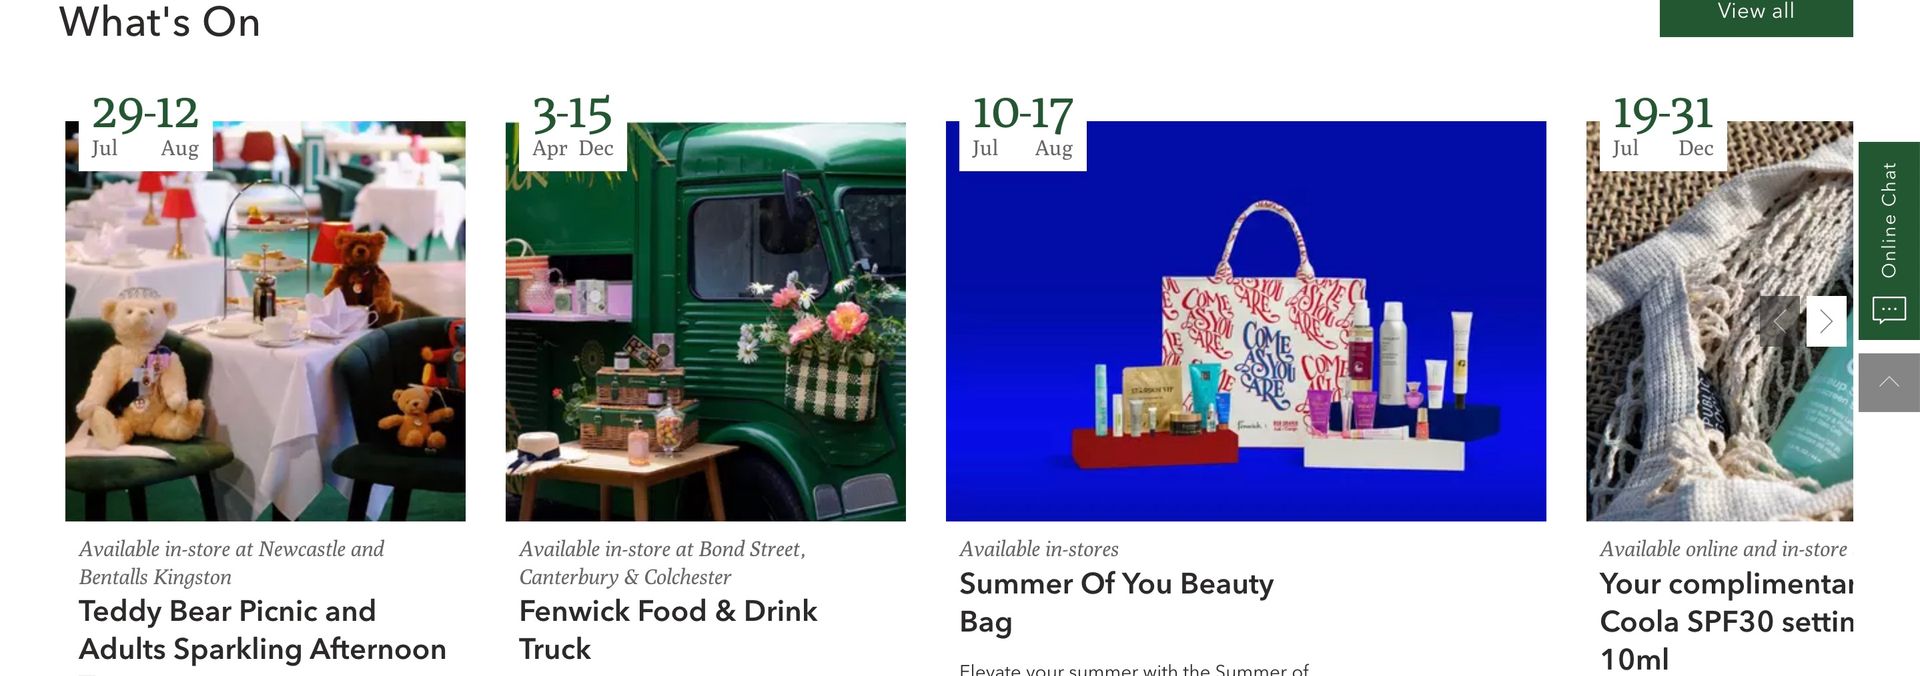 screenshot of the Fenwick homepage in August 2023, highlighting the What's on section, this has a variery of images including a tea party with teddys, a green food and drink truck and a bag of cosmetics. These images do have not been provided with alt text